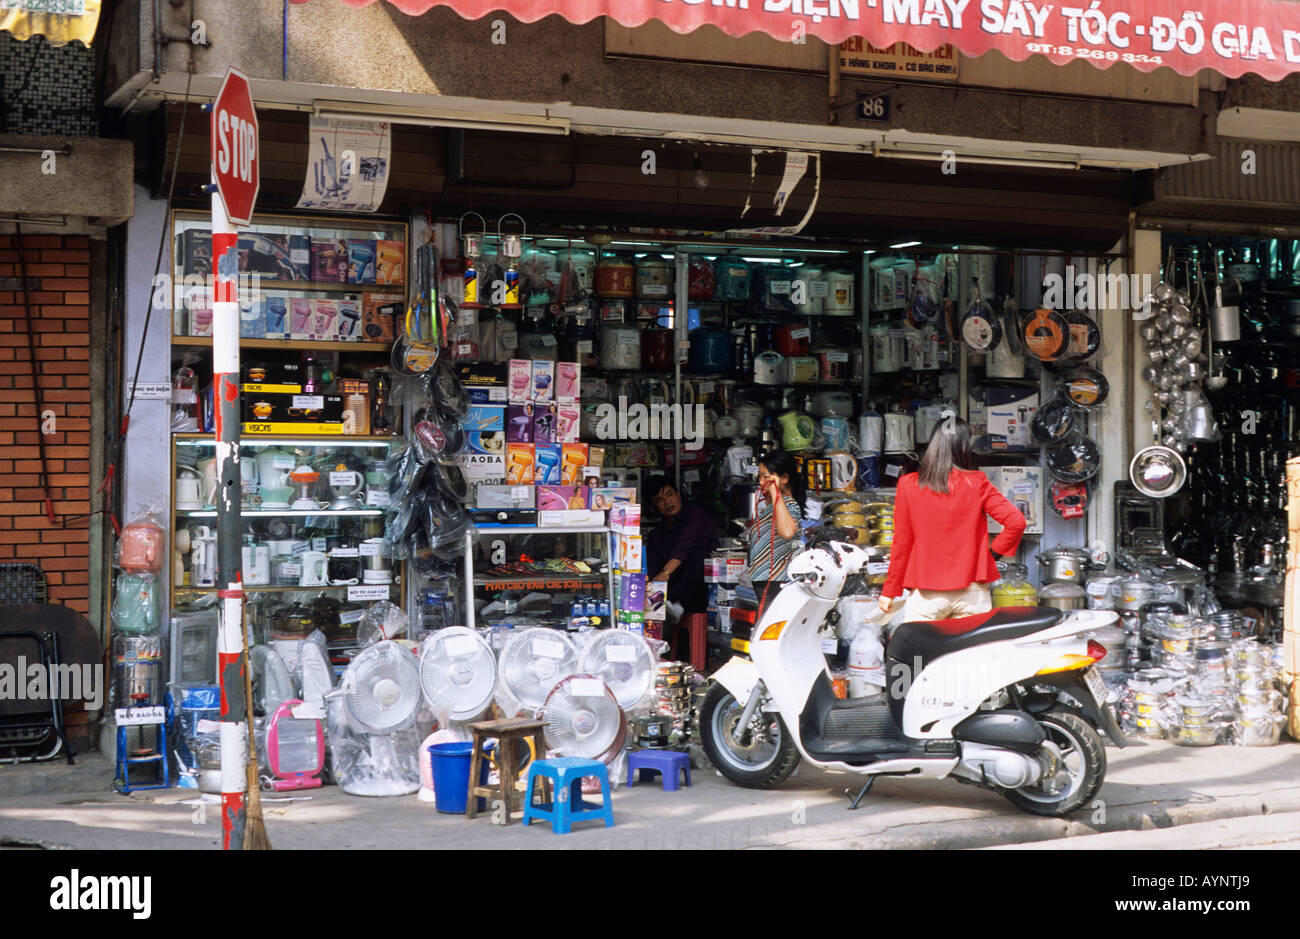 A scooter parked outside an electrical appliance shop in Old Hanoi Stock  Photo - Alamy